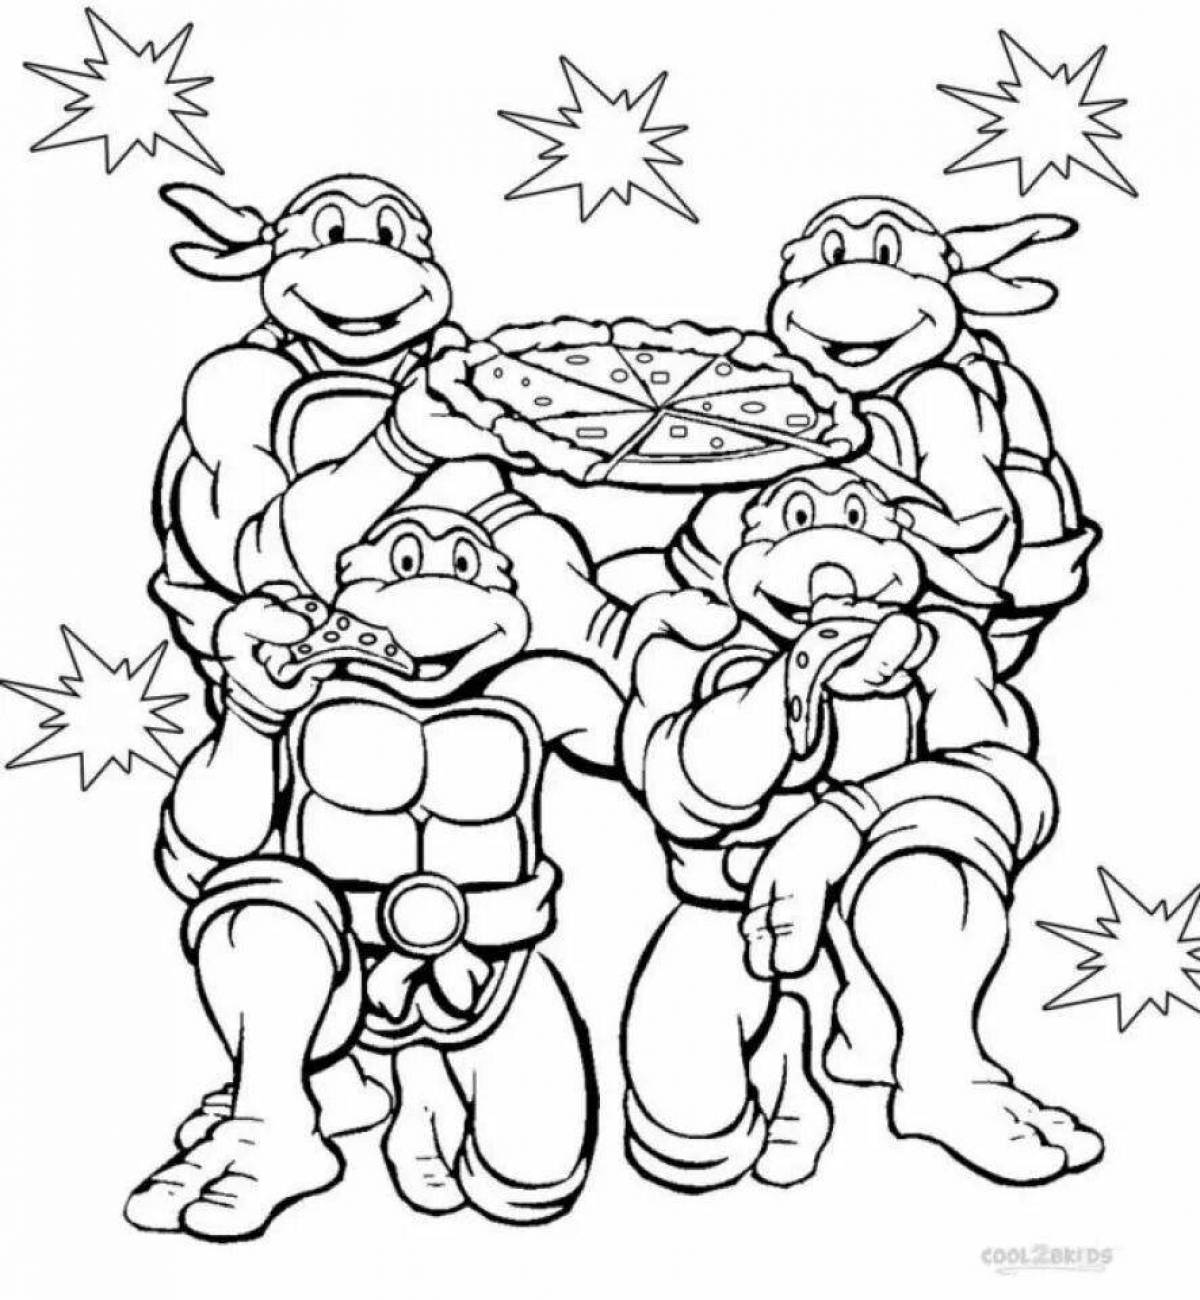 Great Teenage Mutant Ninja Turtles Coloring Pages for Toddlers